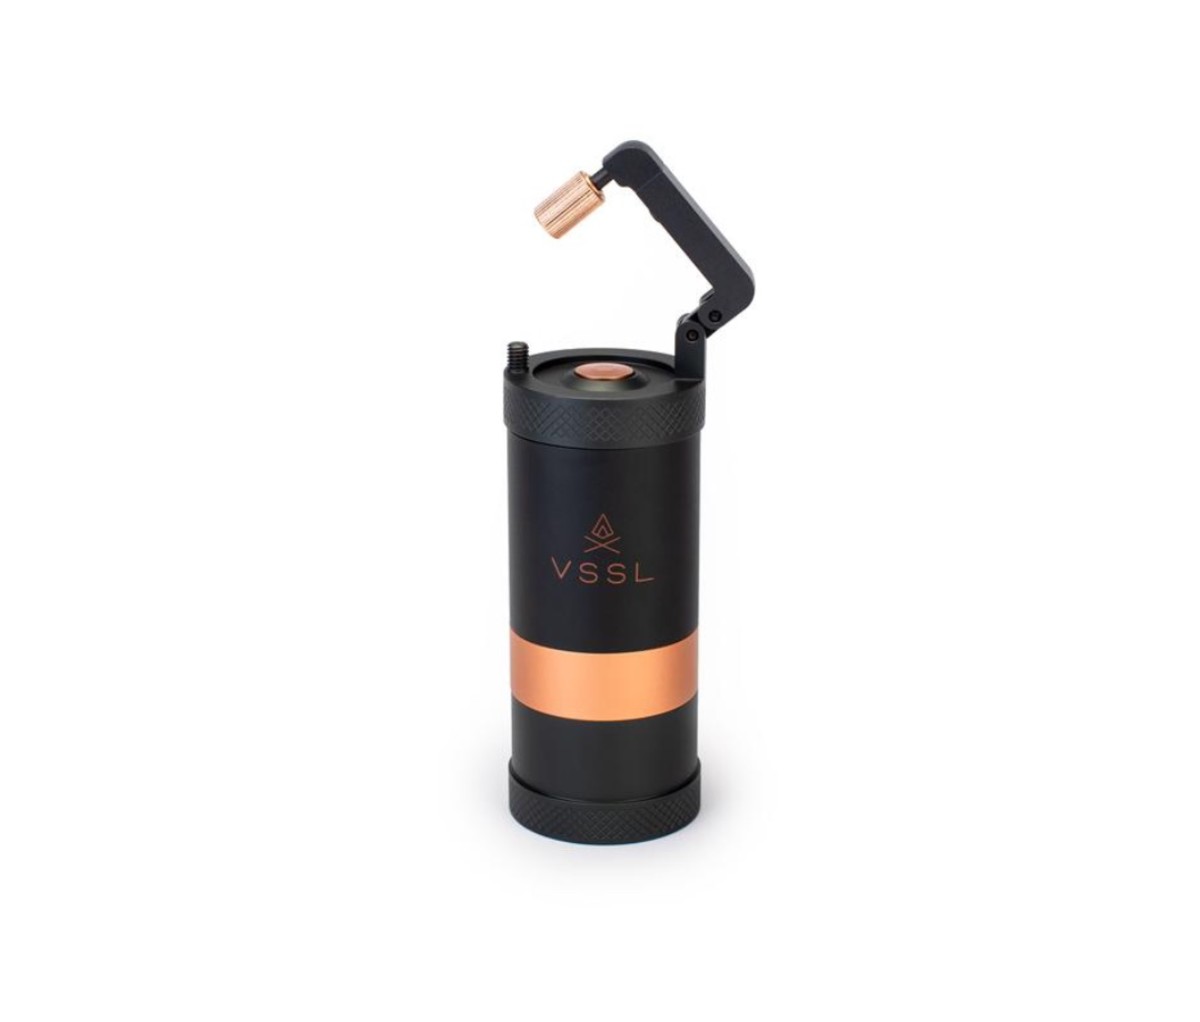 For a luxurious coffee experience in the outdoors, choose this barista-quality gear.